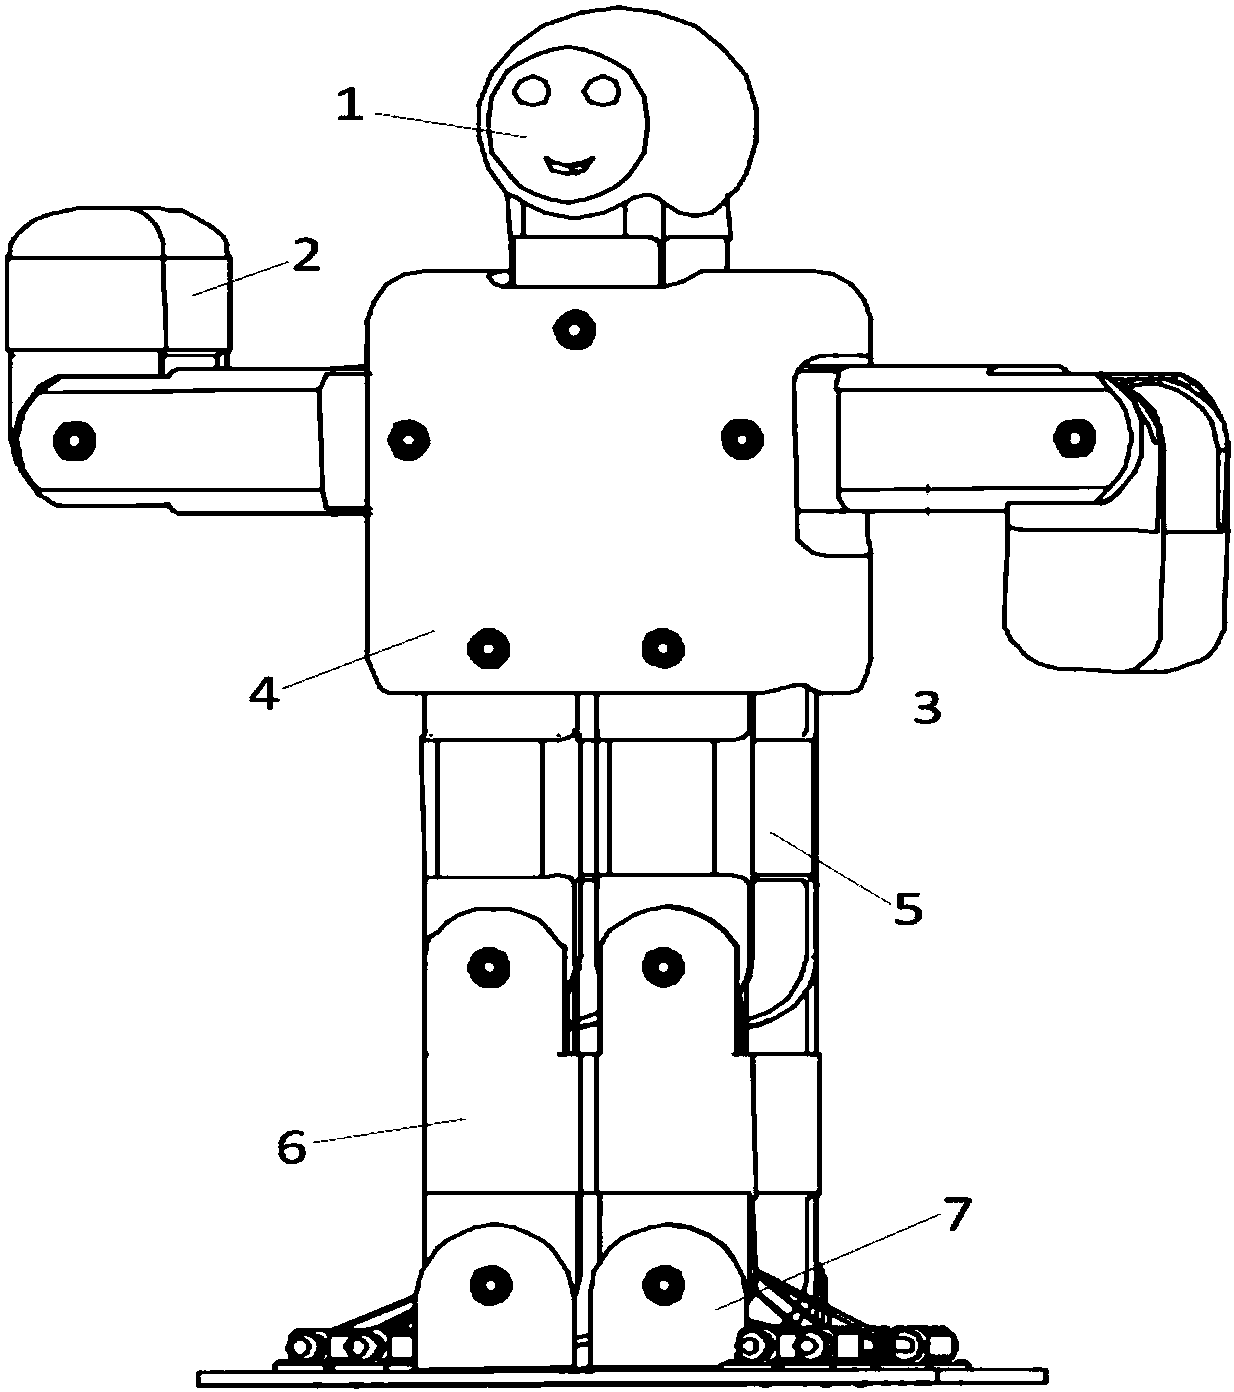 A humanoid planar multi-joint robot based on belt drive